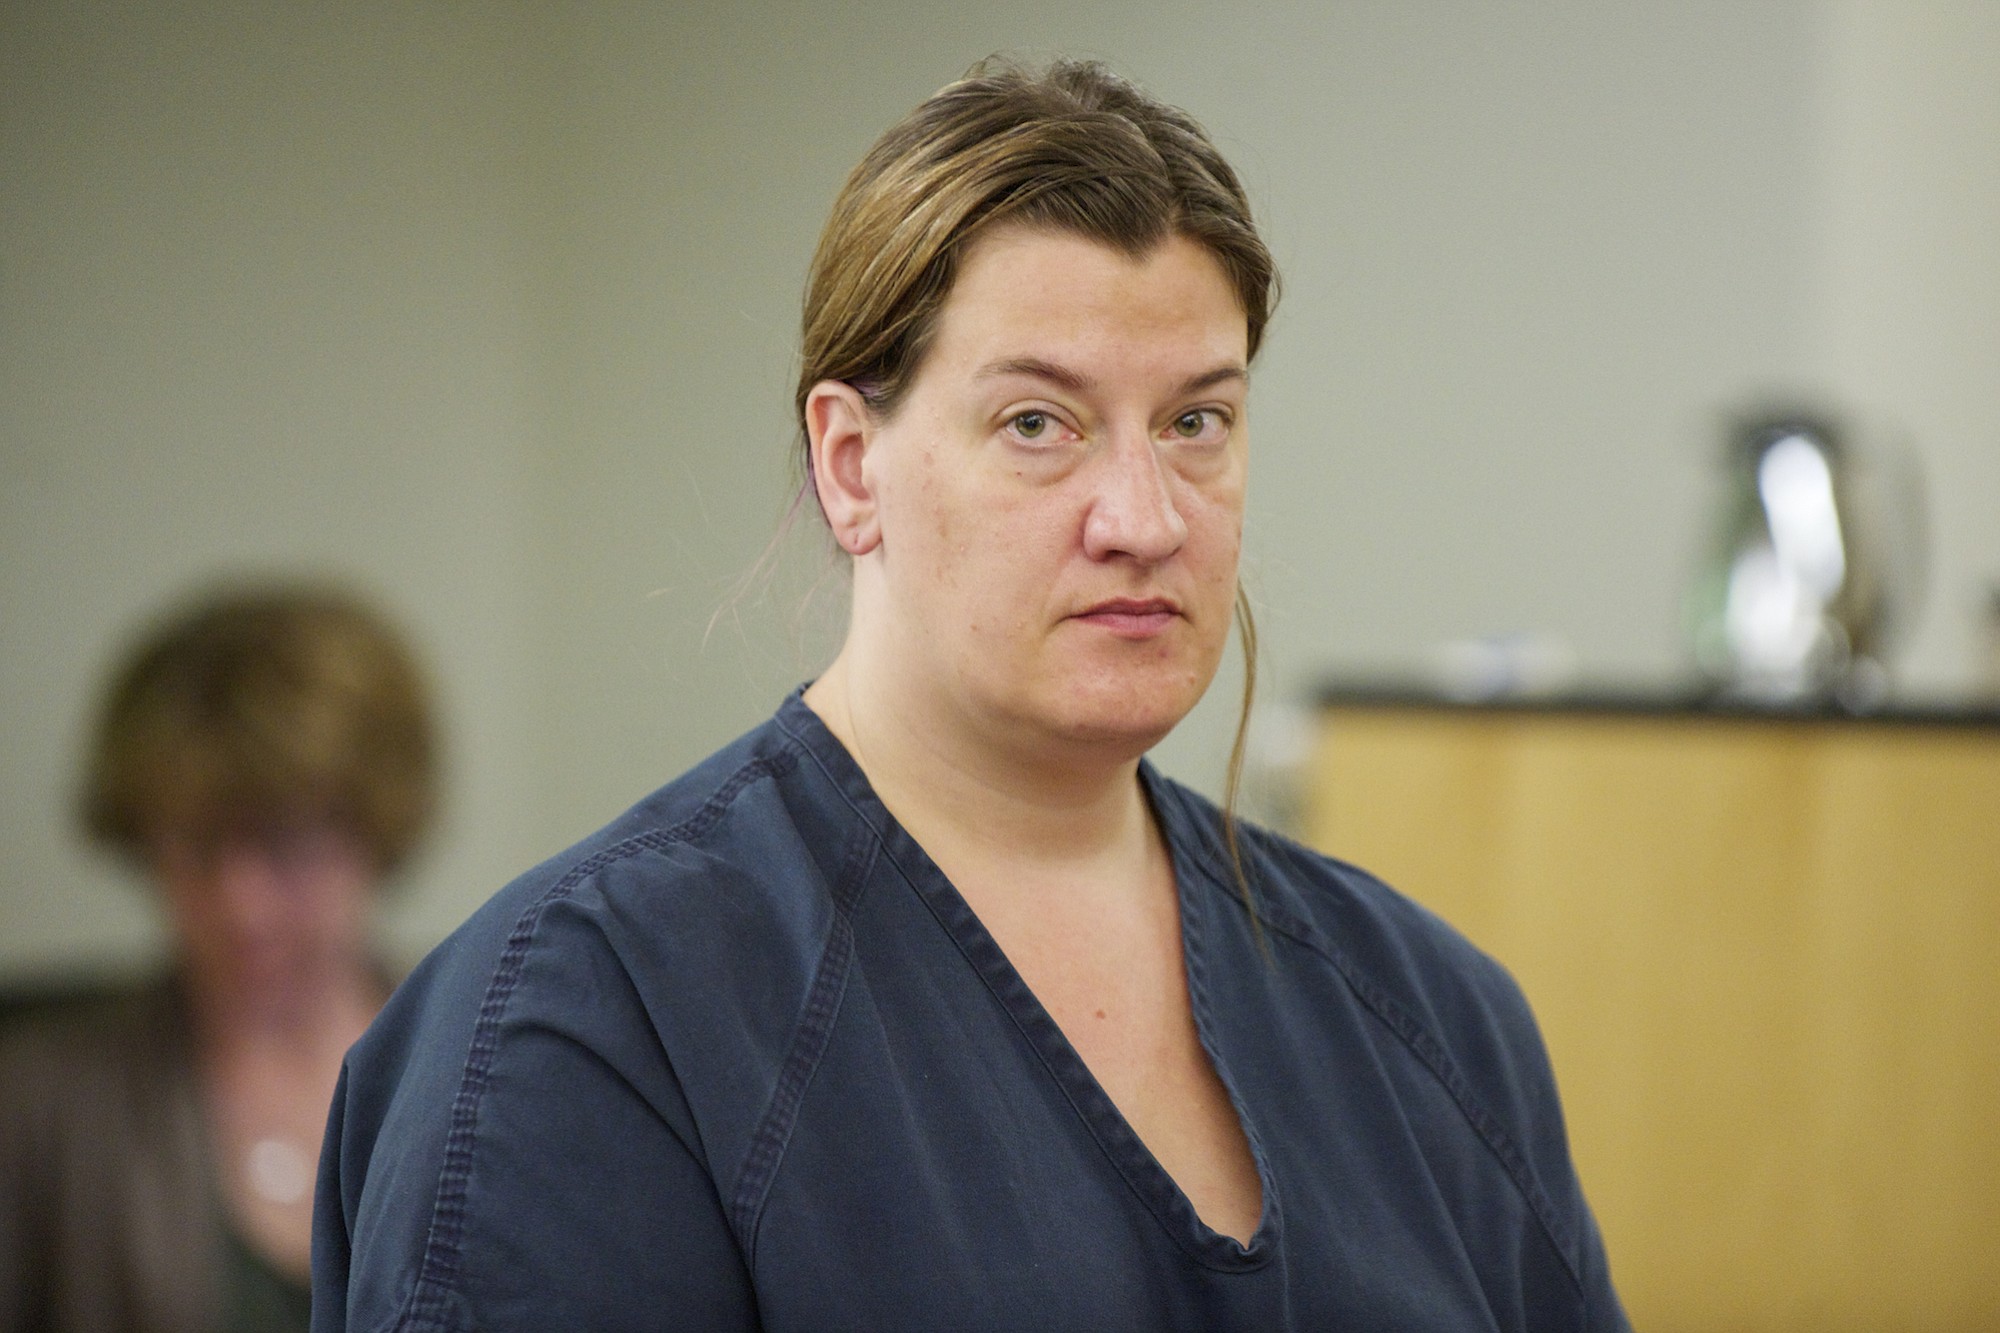 Kimberly Gibson makes a first court appearance Thursday on suspicion of second-degree assault and custodial interference related to her daughter, Stormy, going missing briefly.